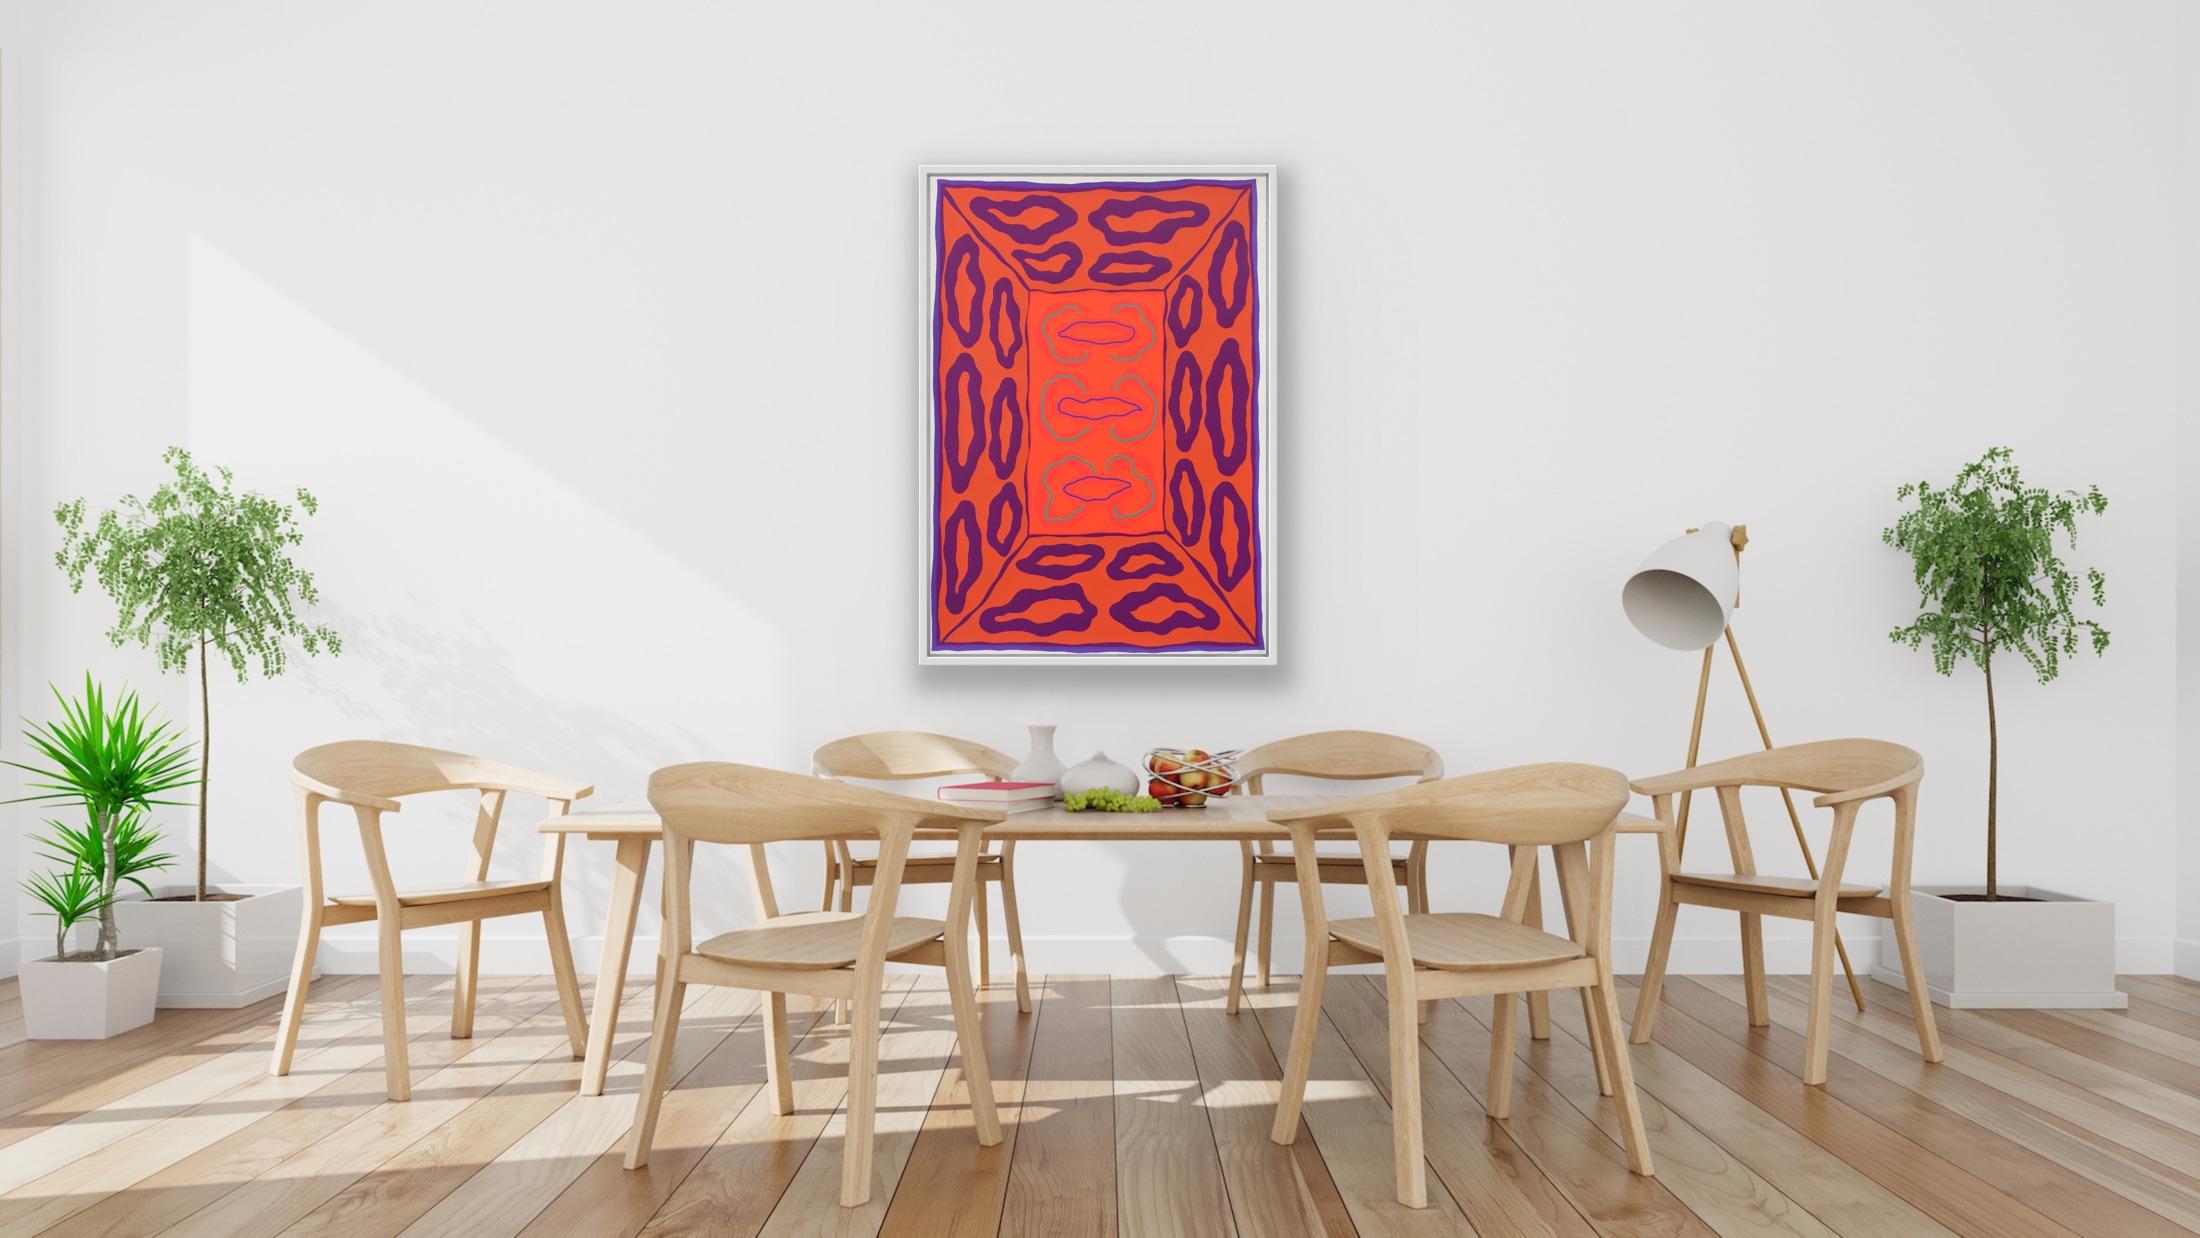 Abstract Brian Eno A Benjamin Modern Limited Print 64 of 95 Red Orange 1970s  11